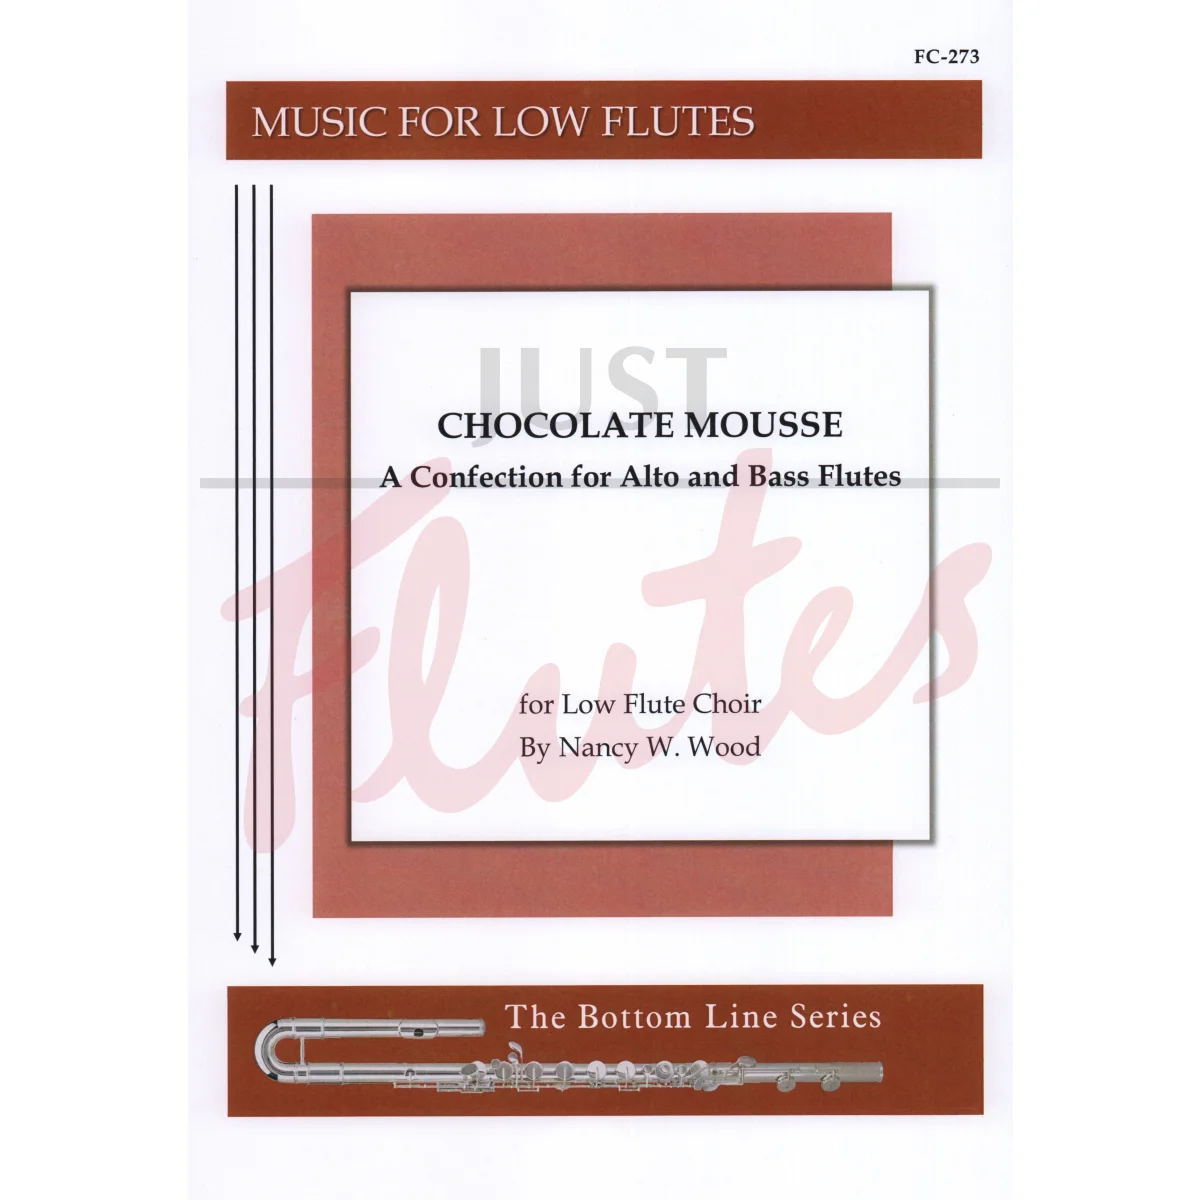 Chocolate Mousse - A Confection for Alto and Bass Flutes